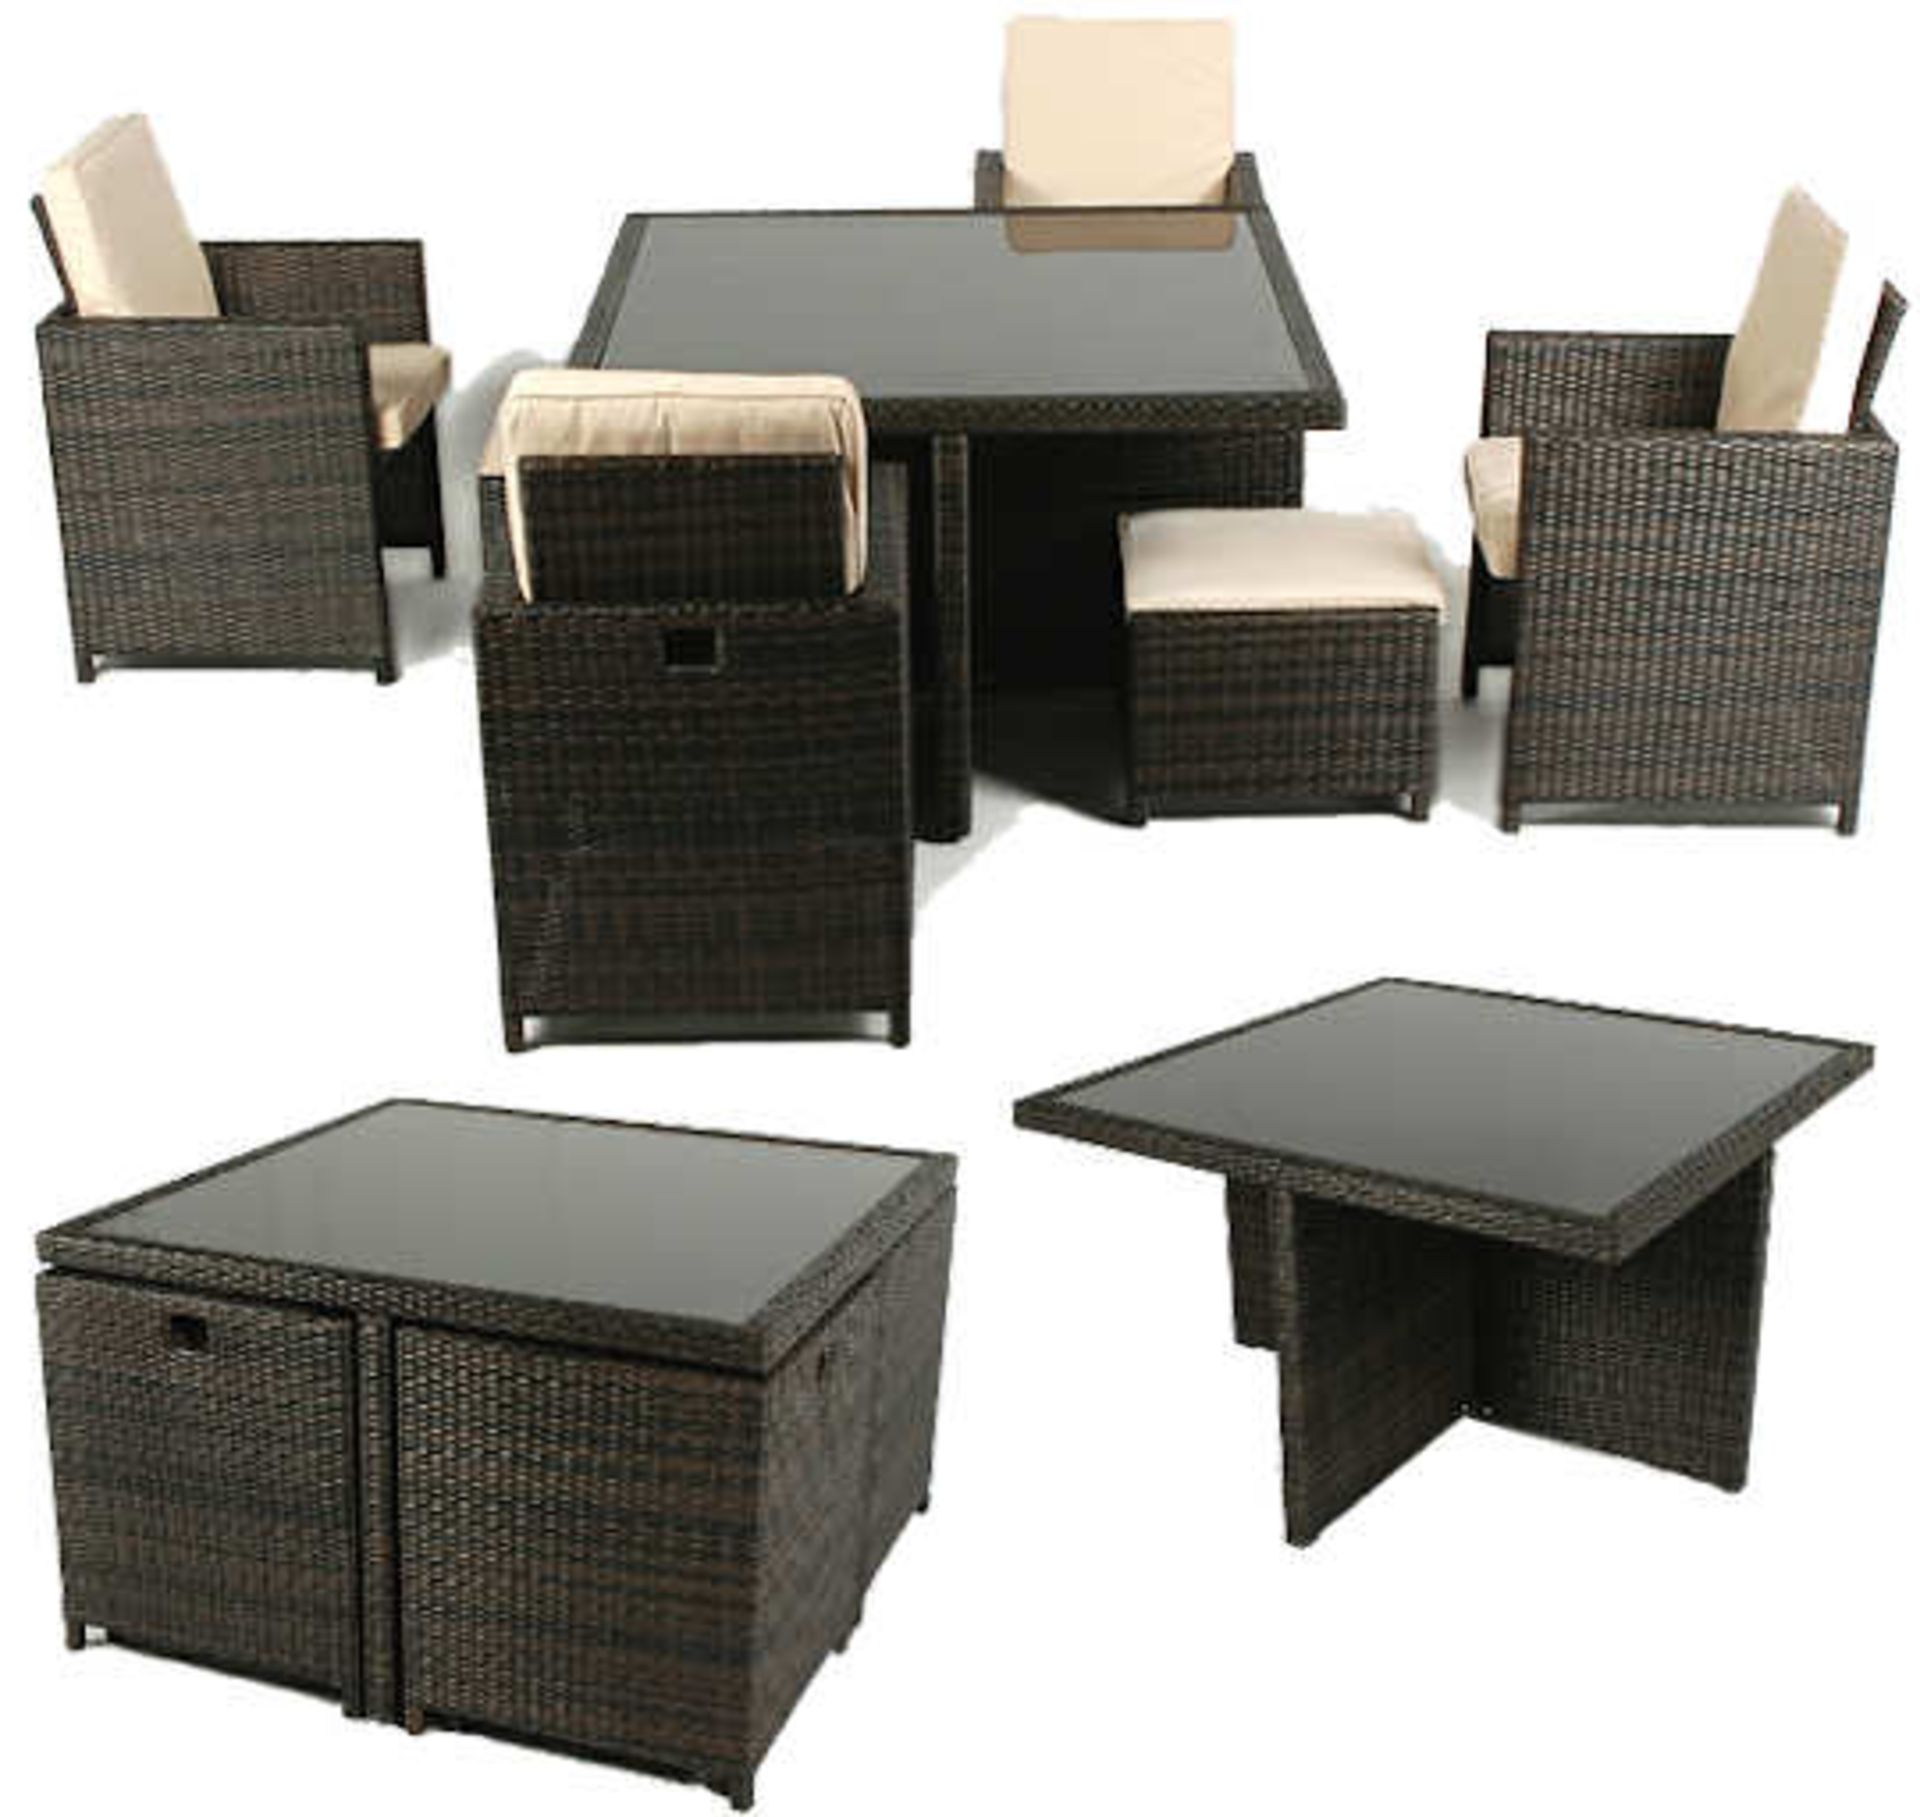 V Brand New 4 Seater Cube Rattan Patio Set With Dining Table - Chairs Fit Neatly Under Table For